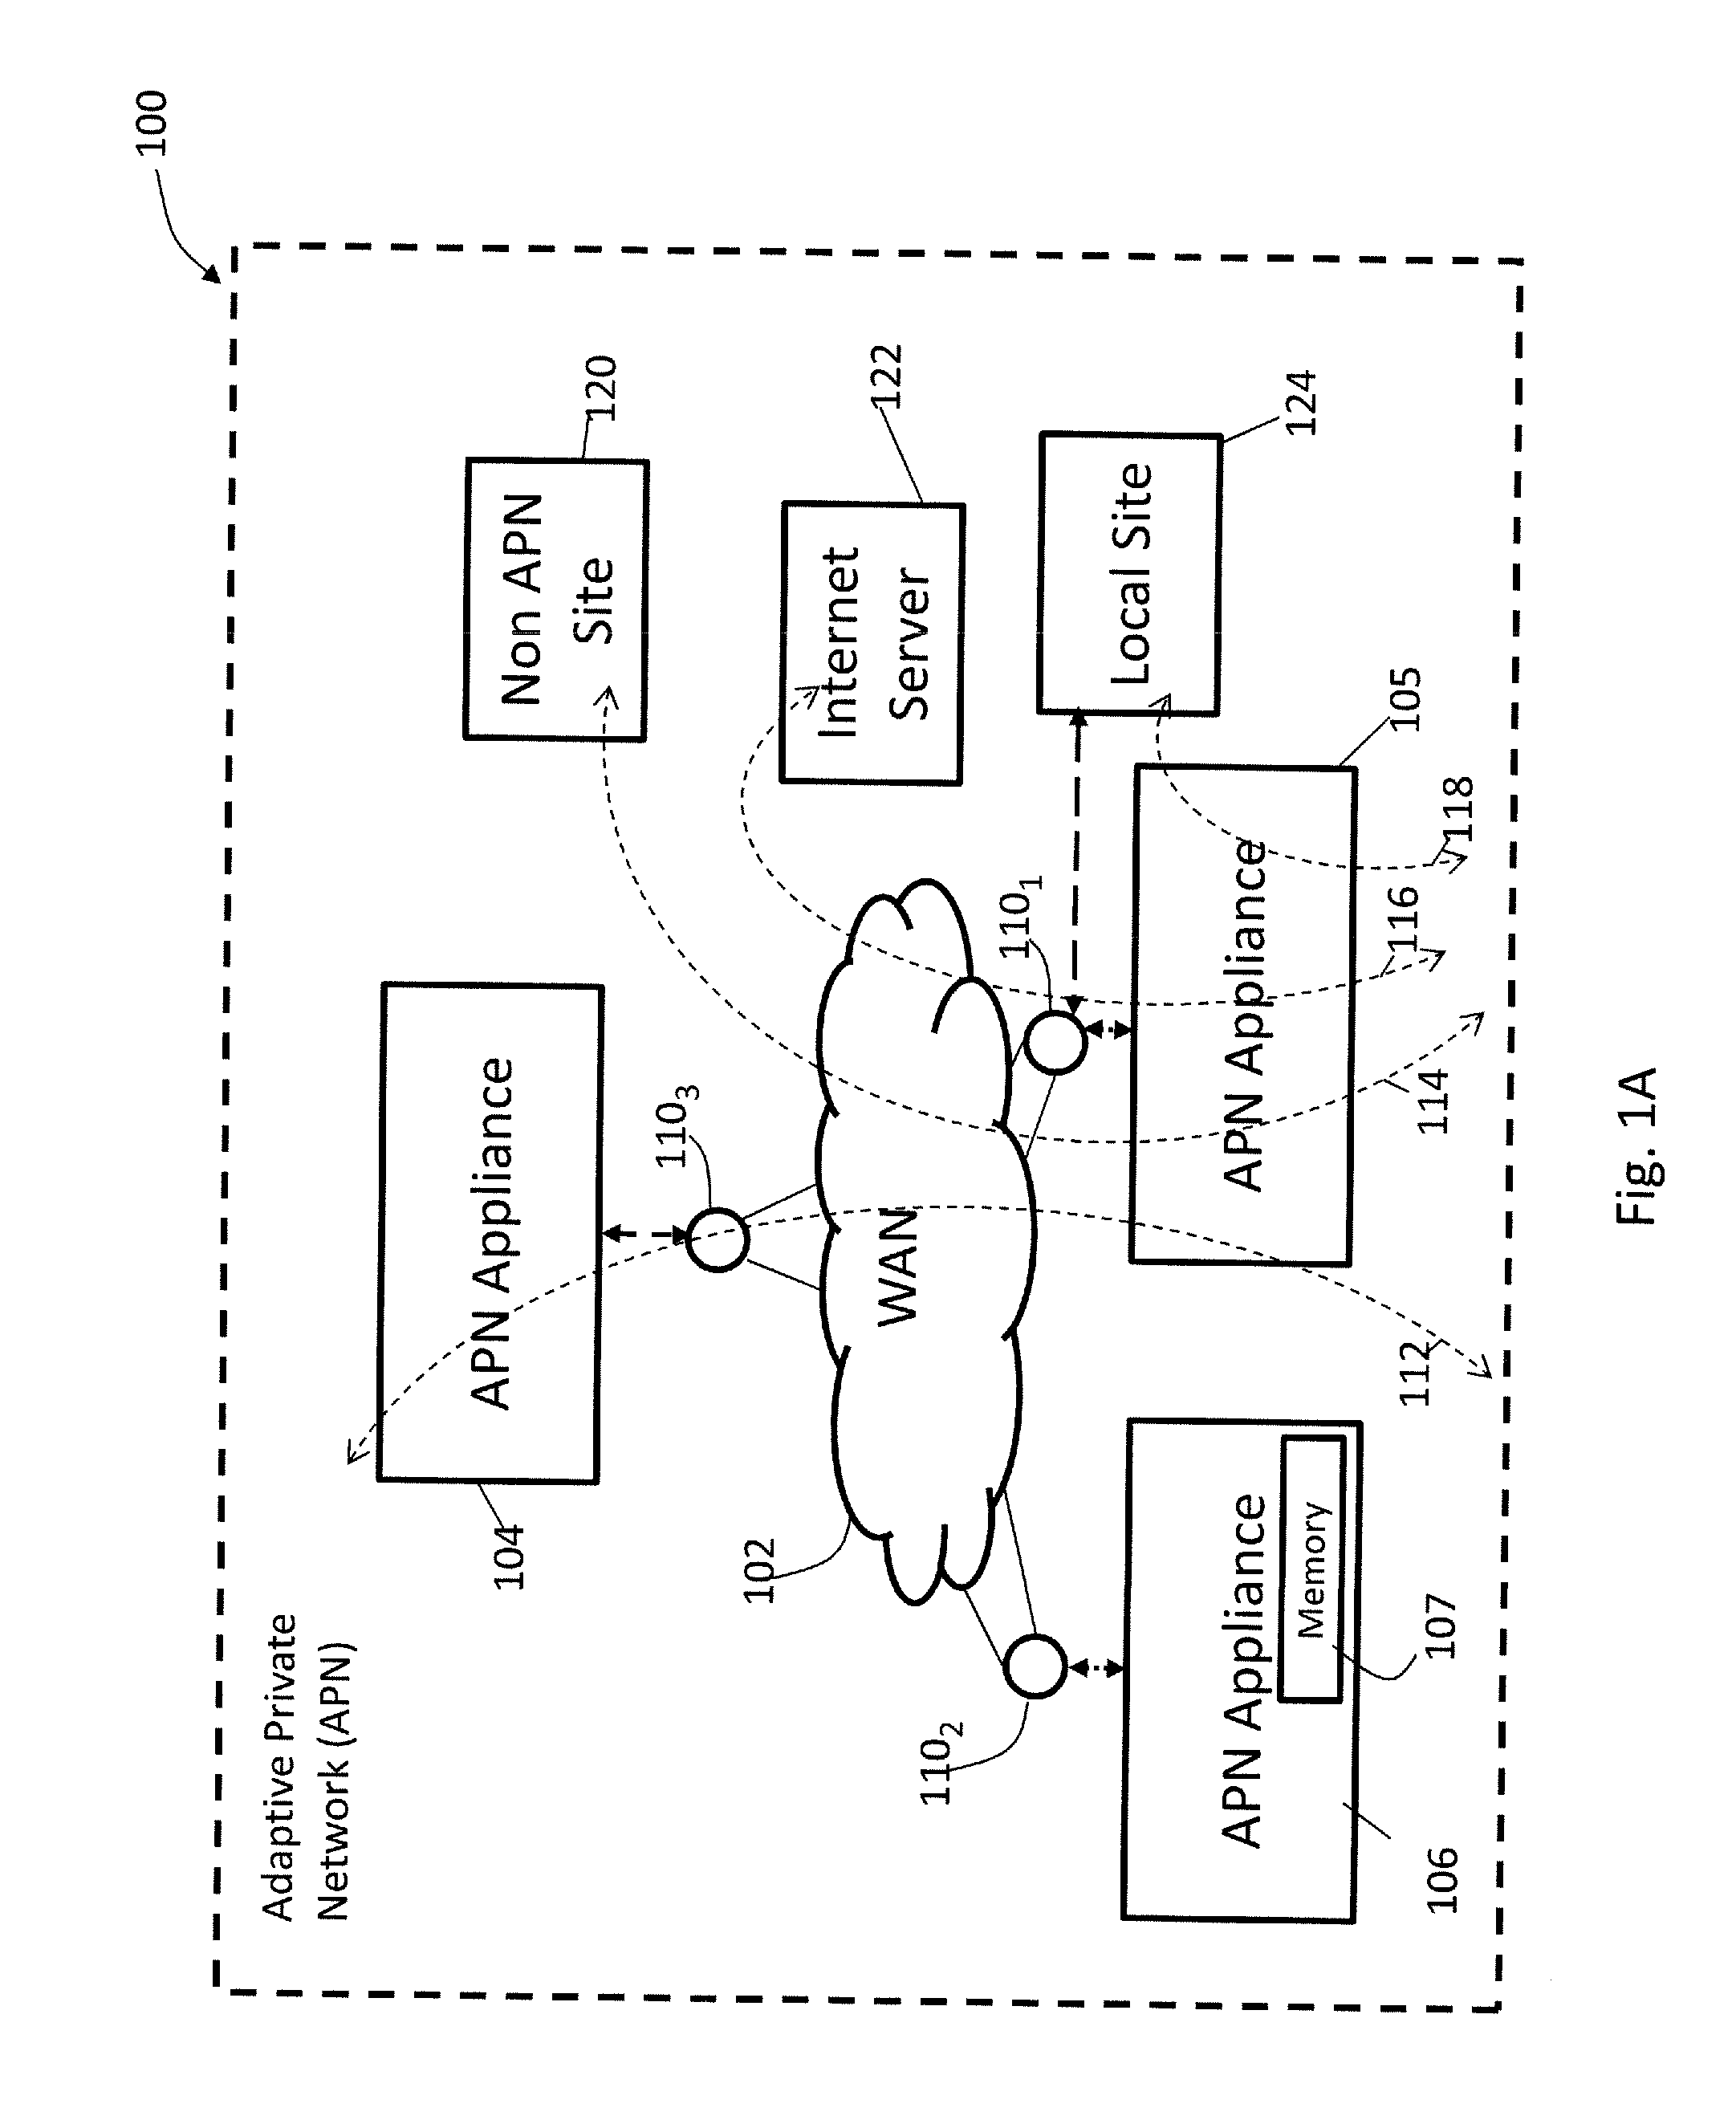 Methods and Apparatus for Providing Adaptive Private Network Centralized Management System Timestamp Correlation Processes